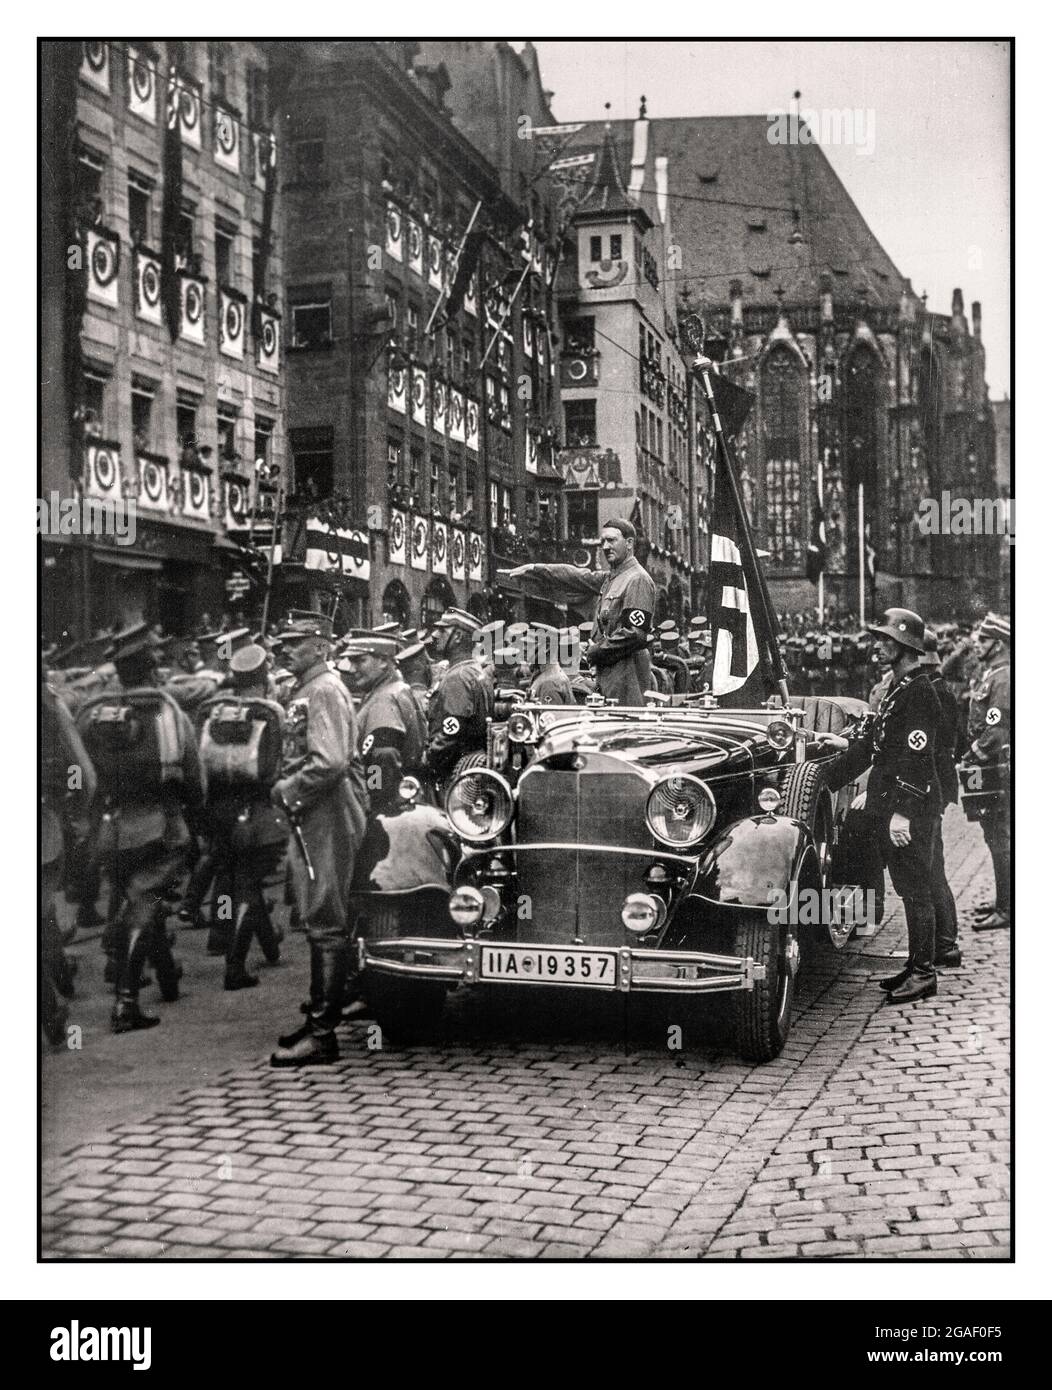 ADOLF HITLER SA TROOPS PARADE 1930s HEIL HITLER SALUTE  Reichsparteitag. Der Vorbeimarsch der SA am Führer. Parade of SA troops past Adolf Hitler in open top Mercedes motor car with Field Marshall Hermann Goering visible standing to his left Nuremberg, Germany November 1935. Adolf Hitler in the 1930's taking a parade salute with the Nazi brown shirt army (Sturmabteilung) and his Waffen SS protection squad Stock Photo